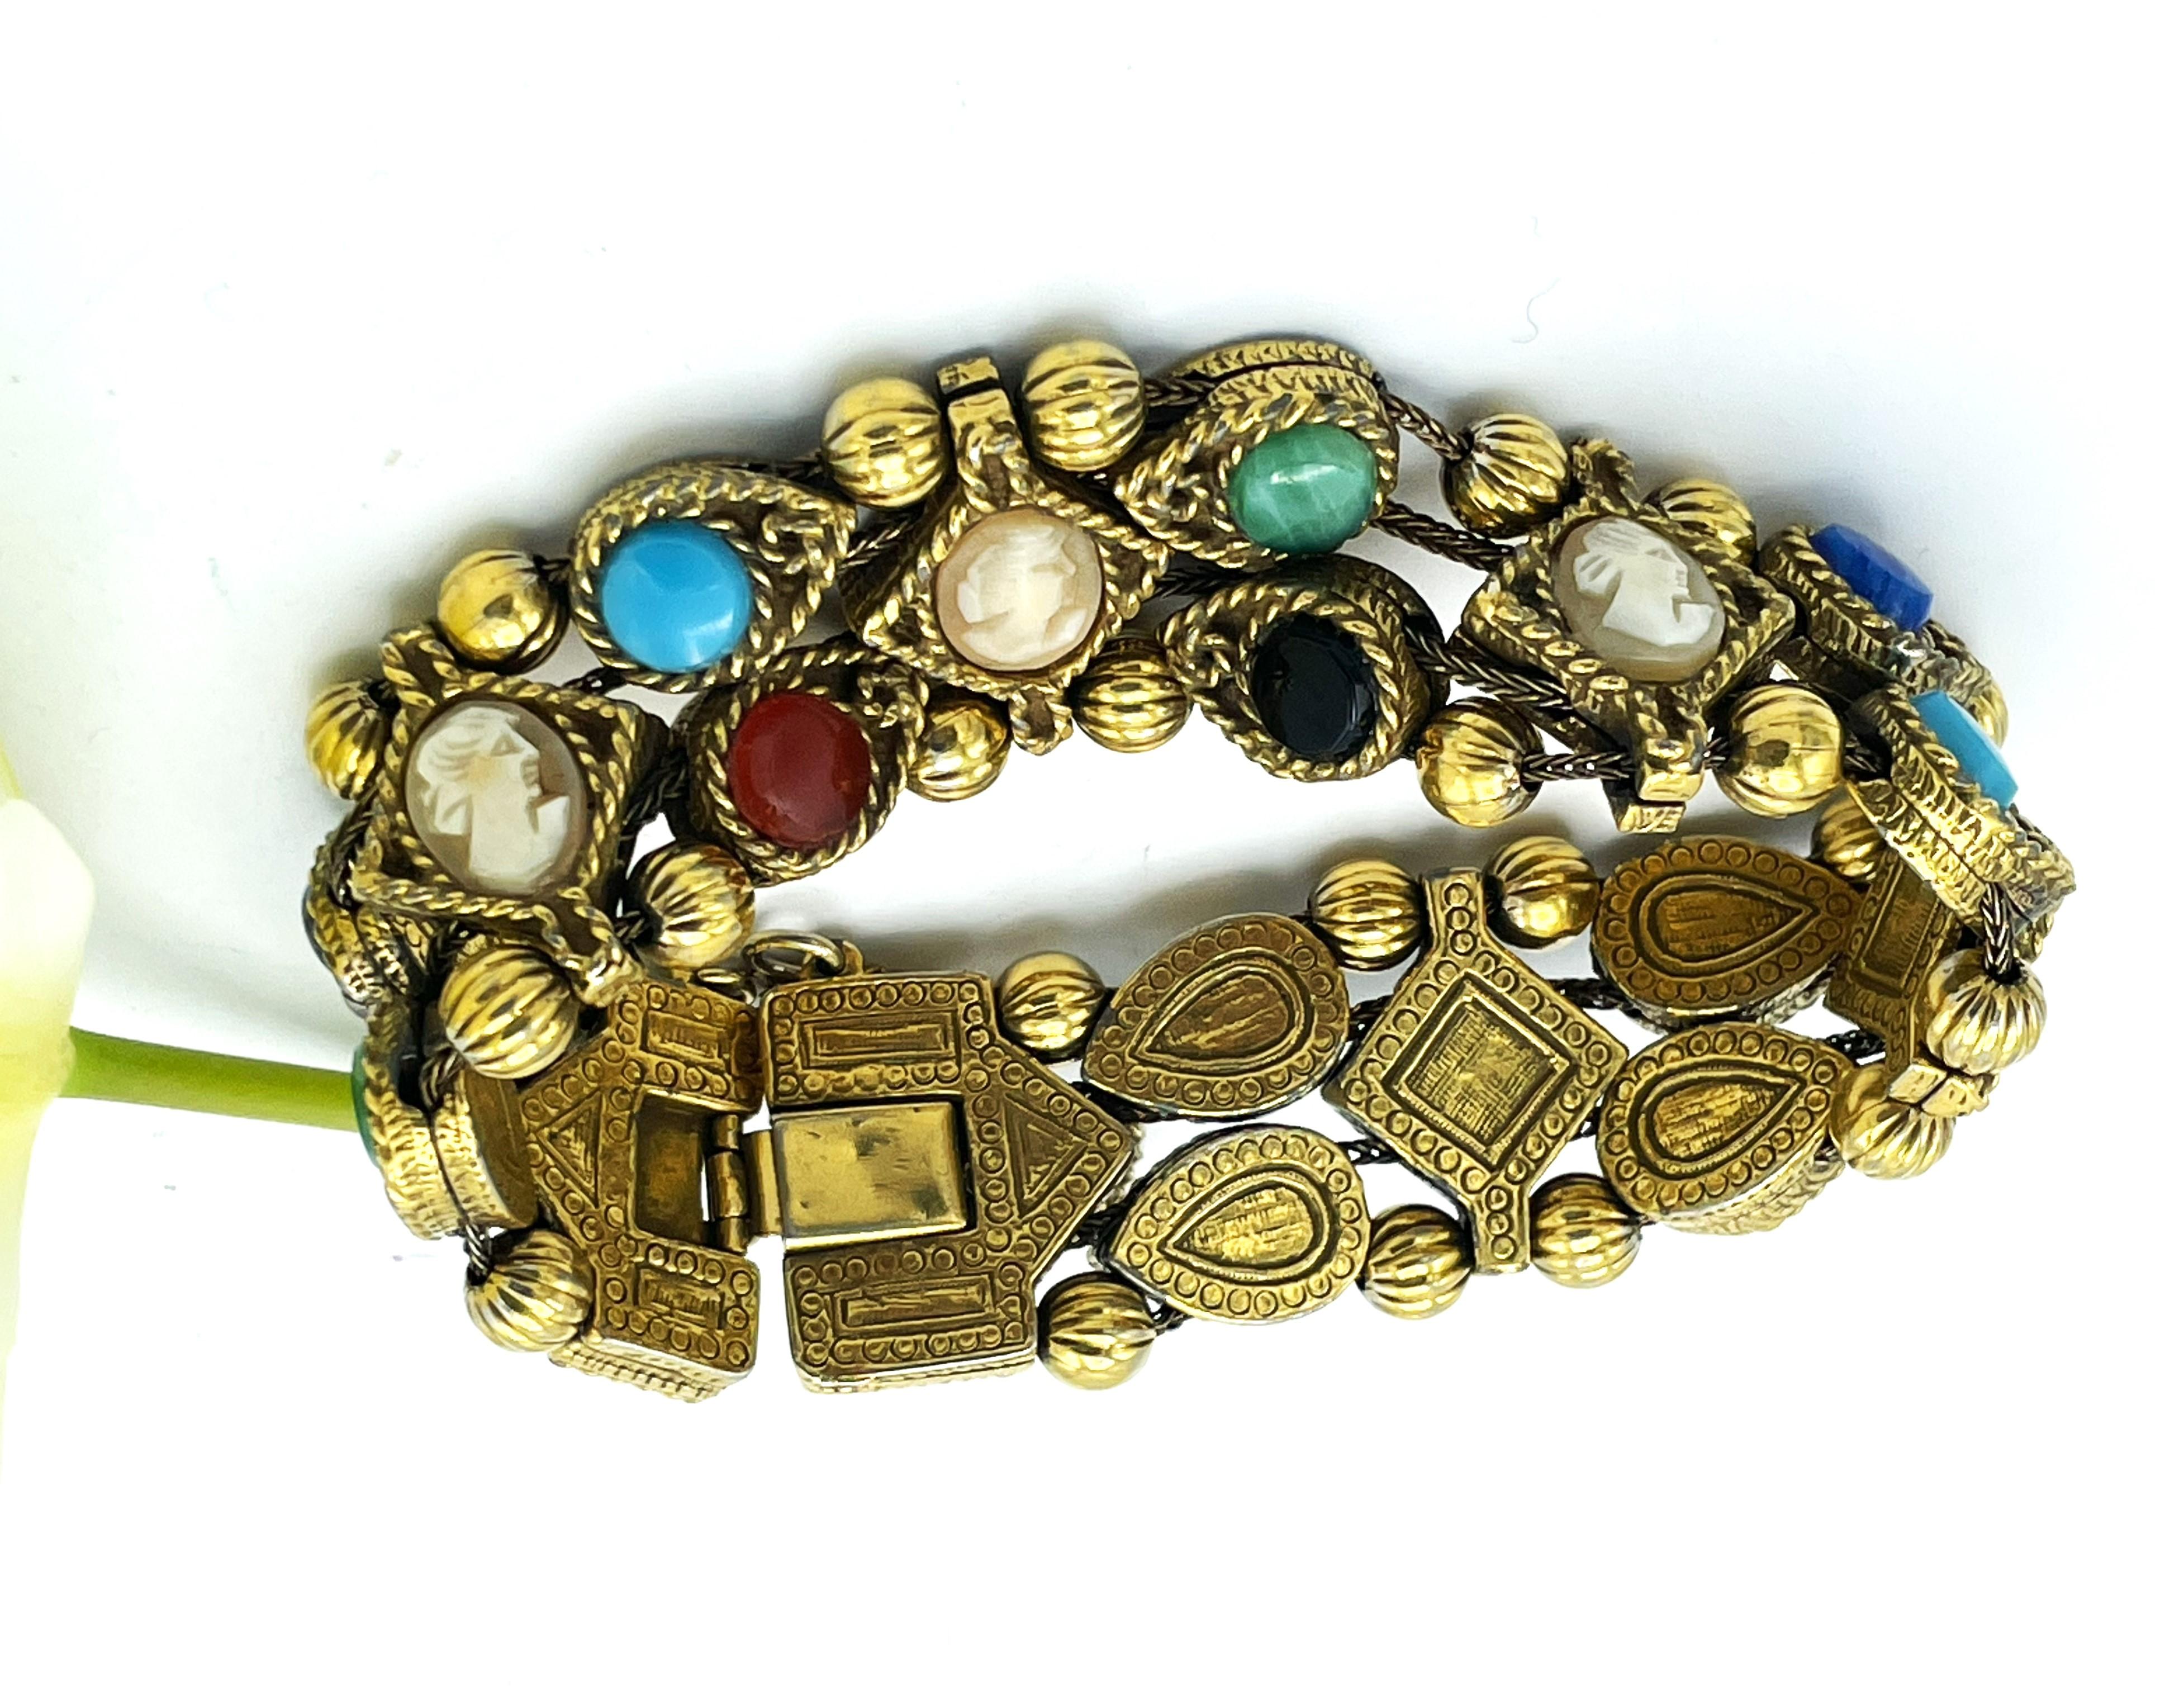 
3 rows of movable bracelets with gems and colorful glass stones. Gold plated, 1950s with Gems and colorful glass stones. 
I think it is modeled after the original ones made of real gold and gemstones.

Dimensions: 
Length of the bracelet 19